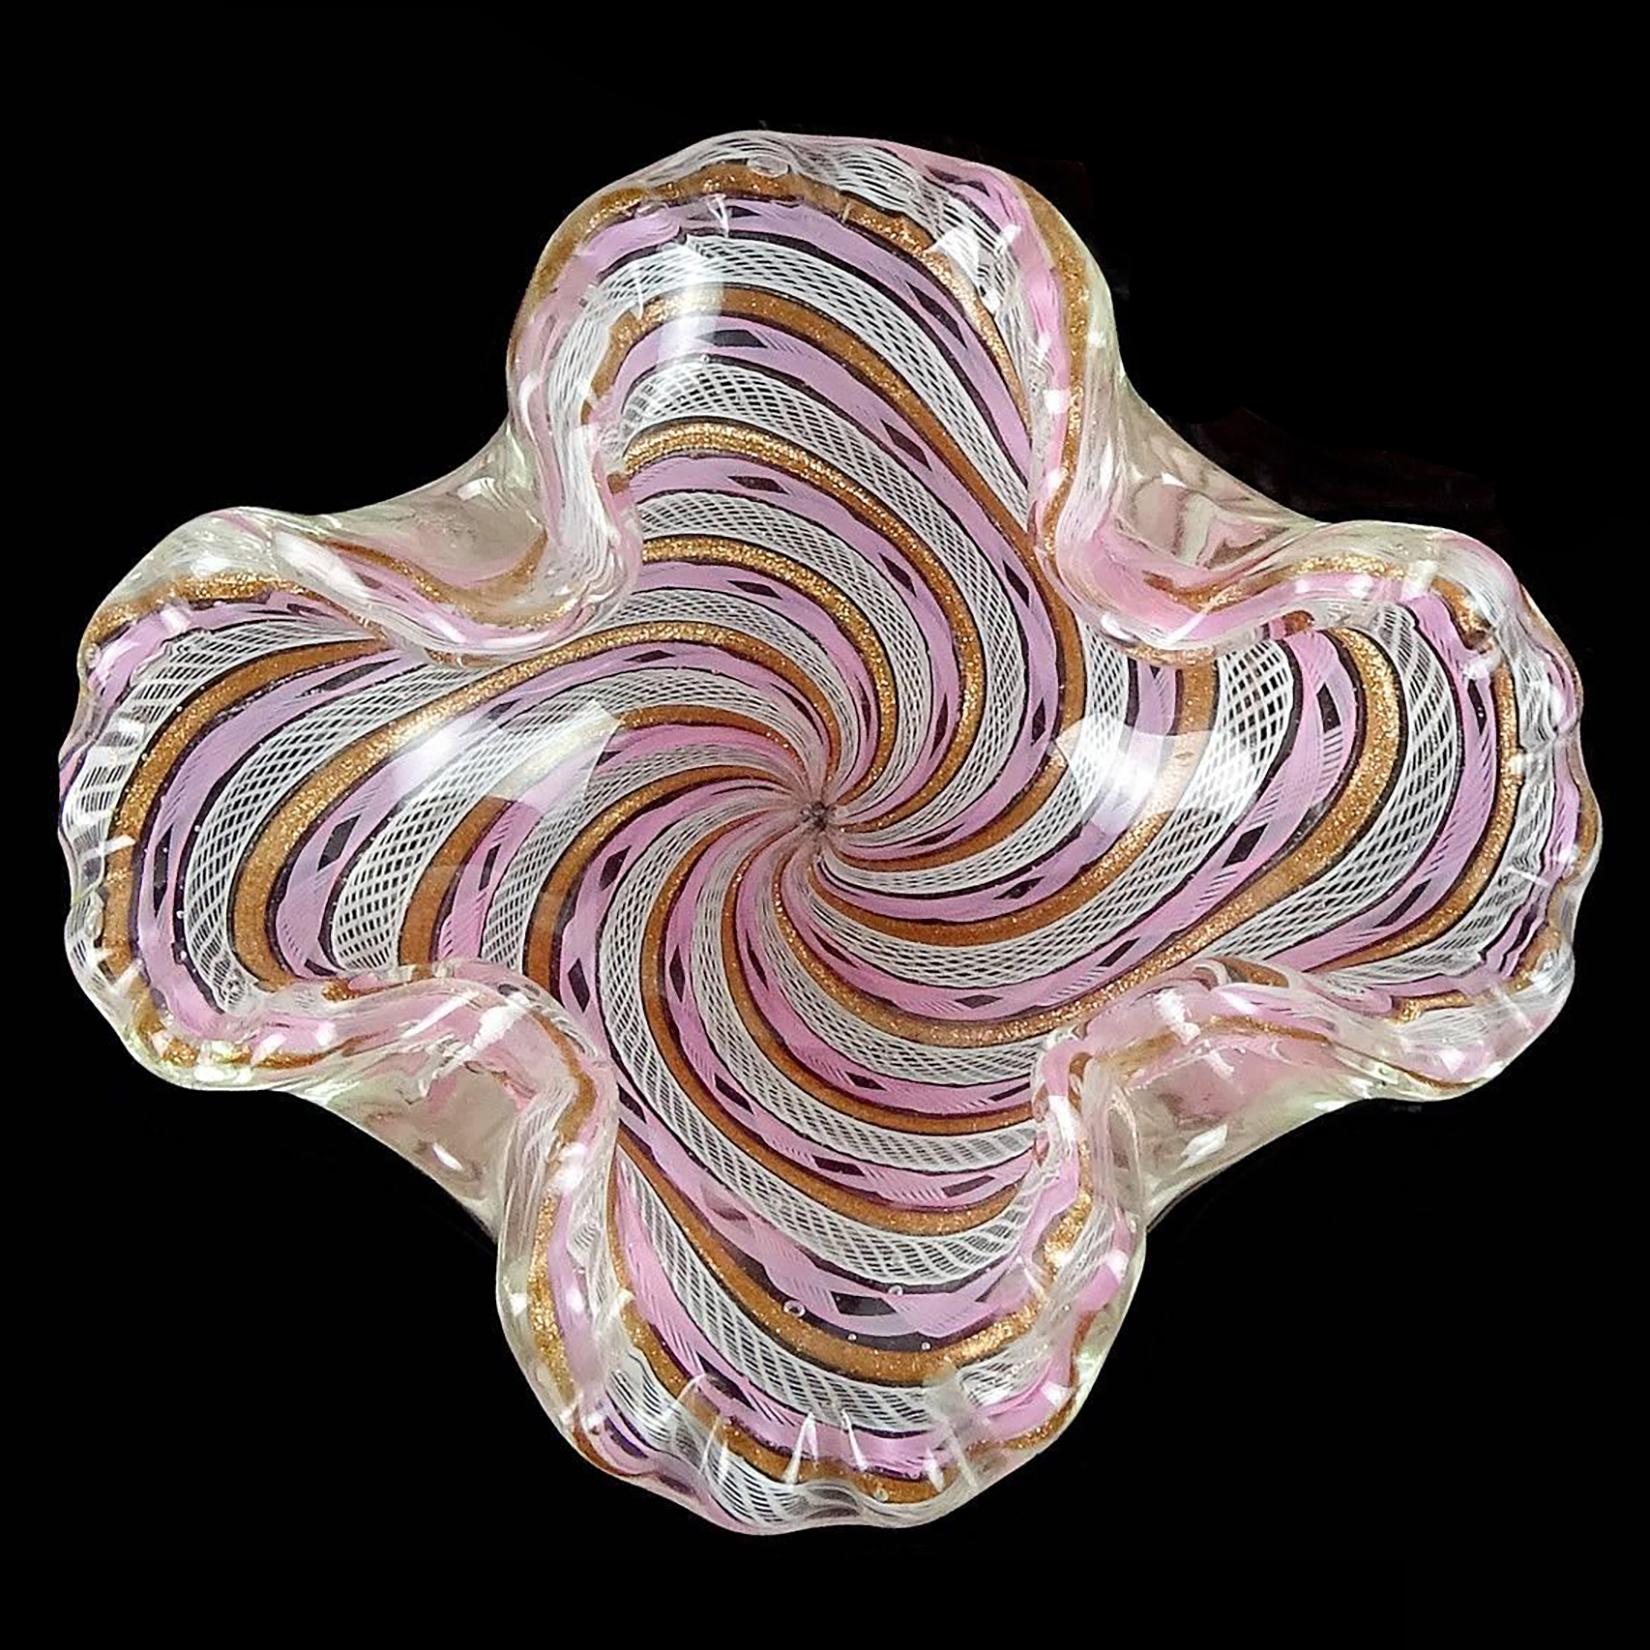 Beautiful vintage Murano hand blown pink, white and copper aventurine twisted Zanfirico ribbons Italian art glass decorative bowl. Documented to the Fratelli Toso company. Has a ruffled and folded in rim. Very intricate designs on the ribbons. Can